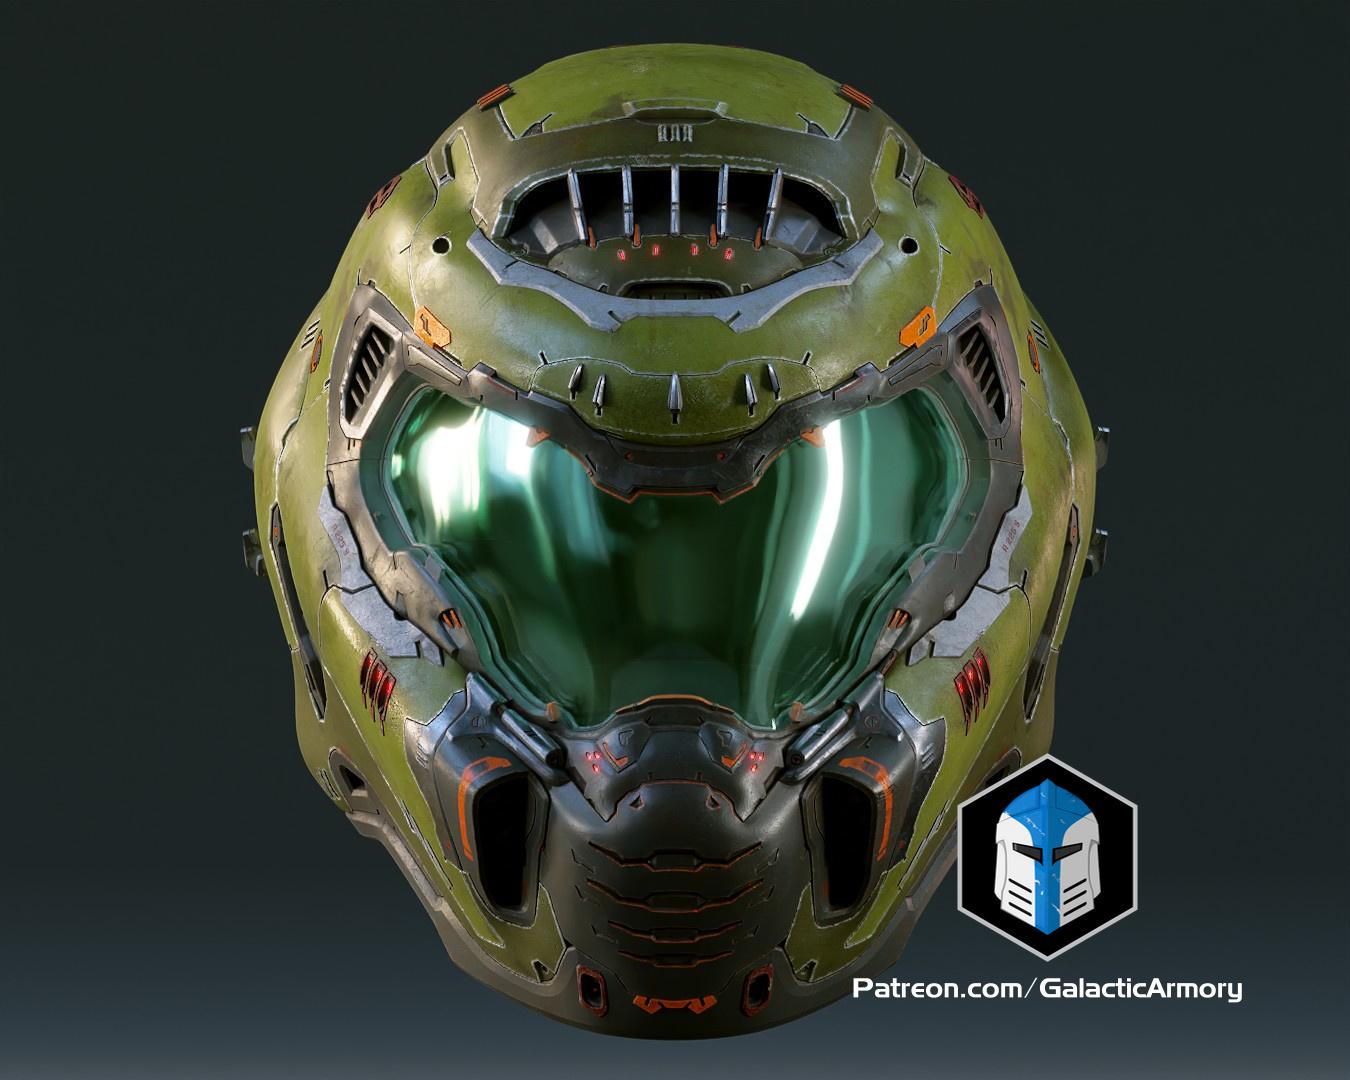 [New Files!] The Doom Slayer Helmet has been added to the Specialist rewards!